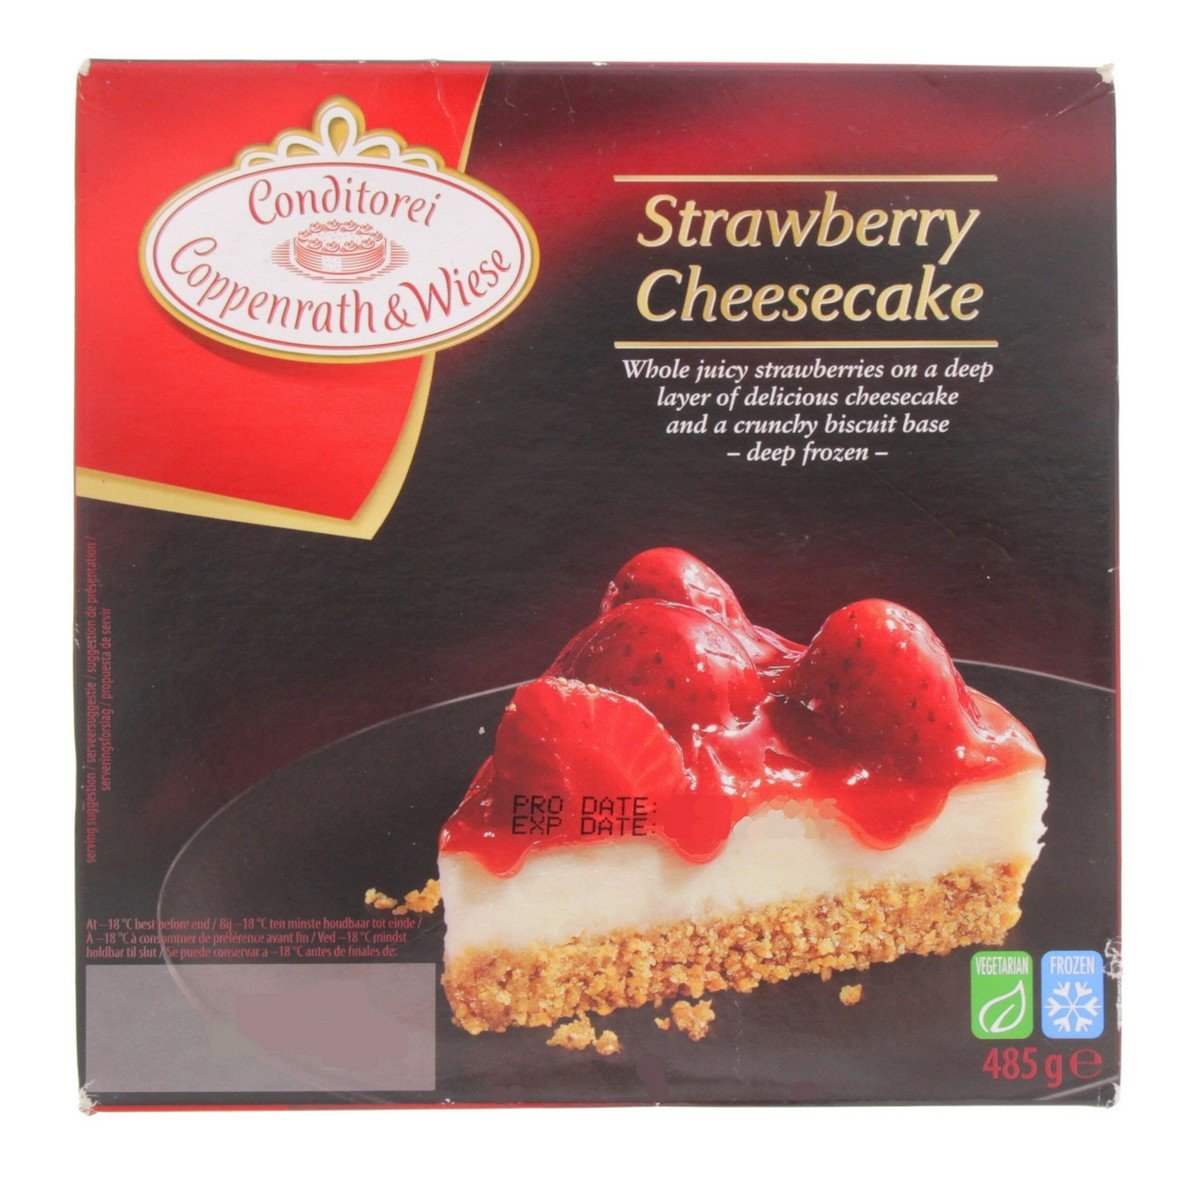 Conditorei Coppenrath And Wiese Strawberry Cheesecake 485 g